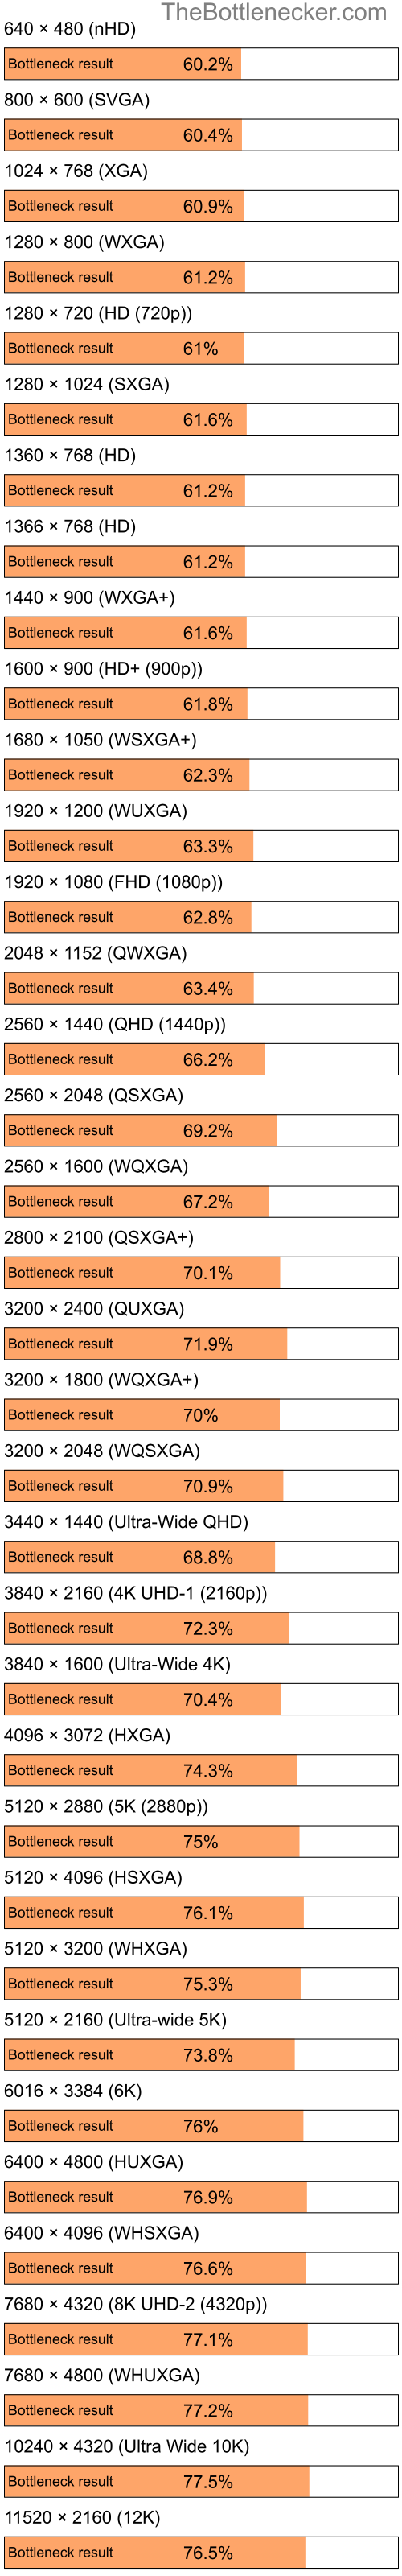 Bottleneck results by resolution for Intel Celeron M 410 and NVIDIA Quadro FX 3400 in General Tasks